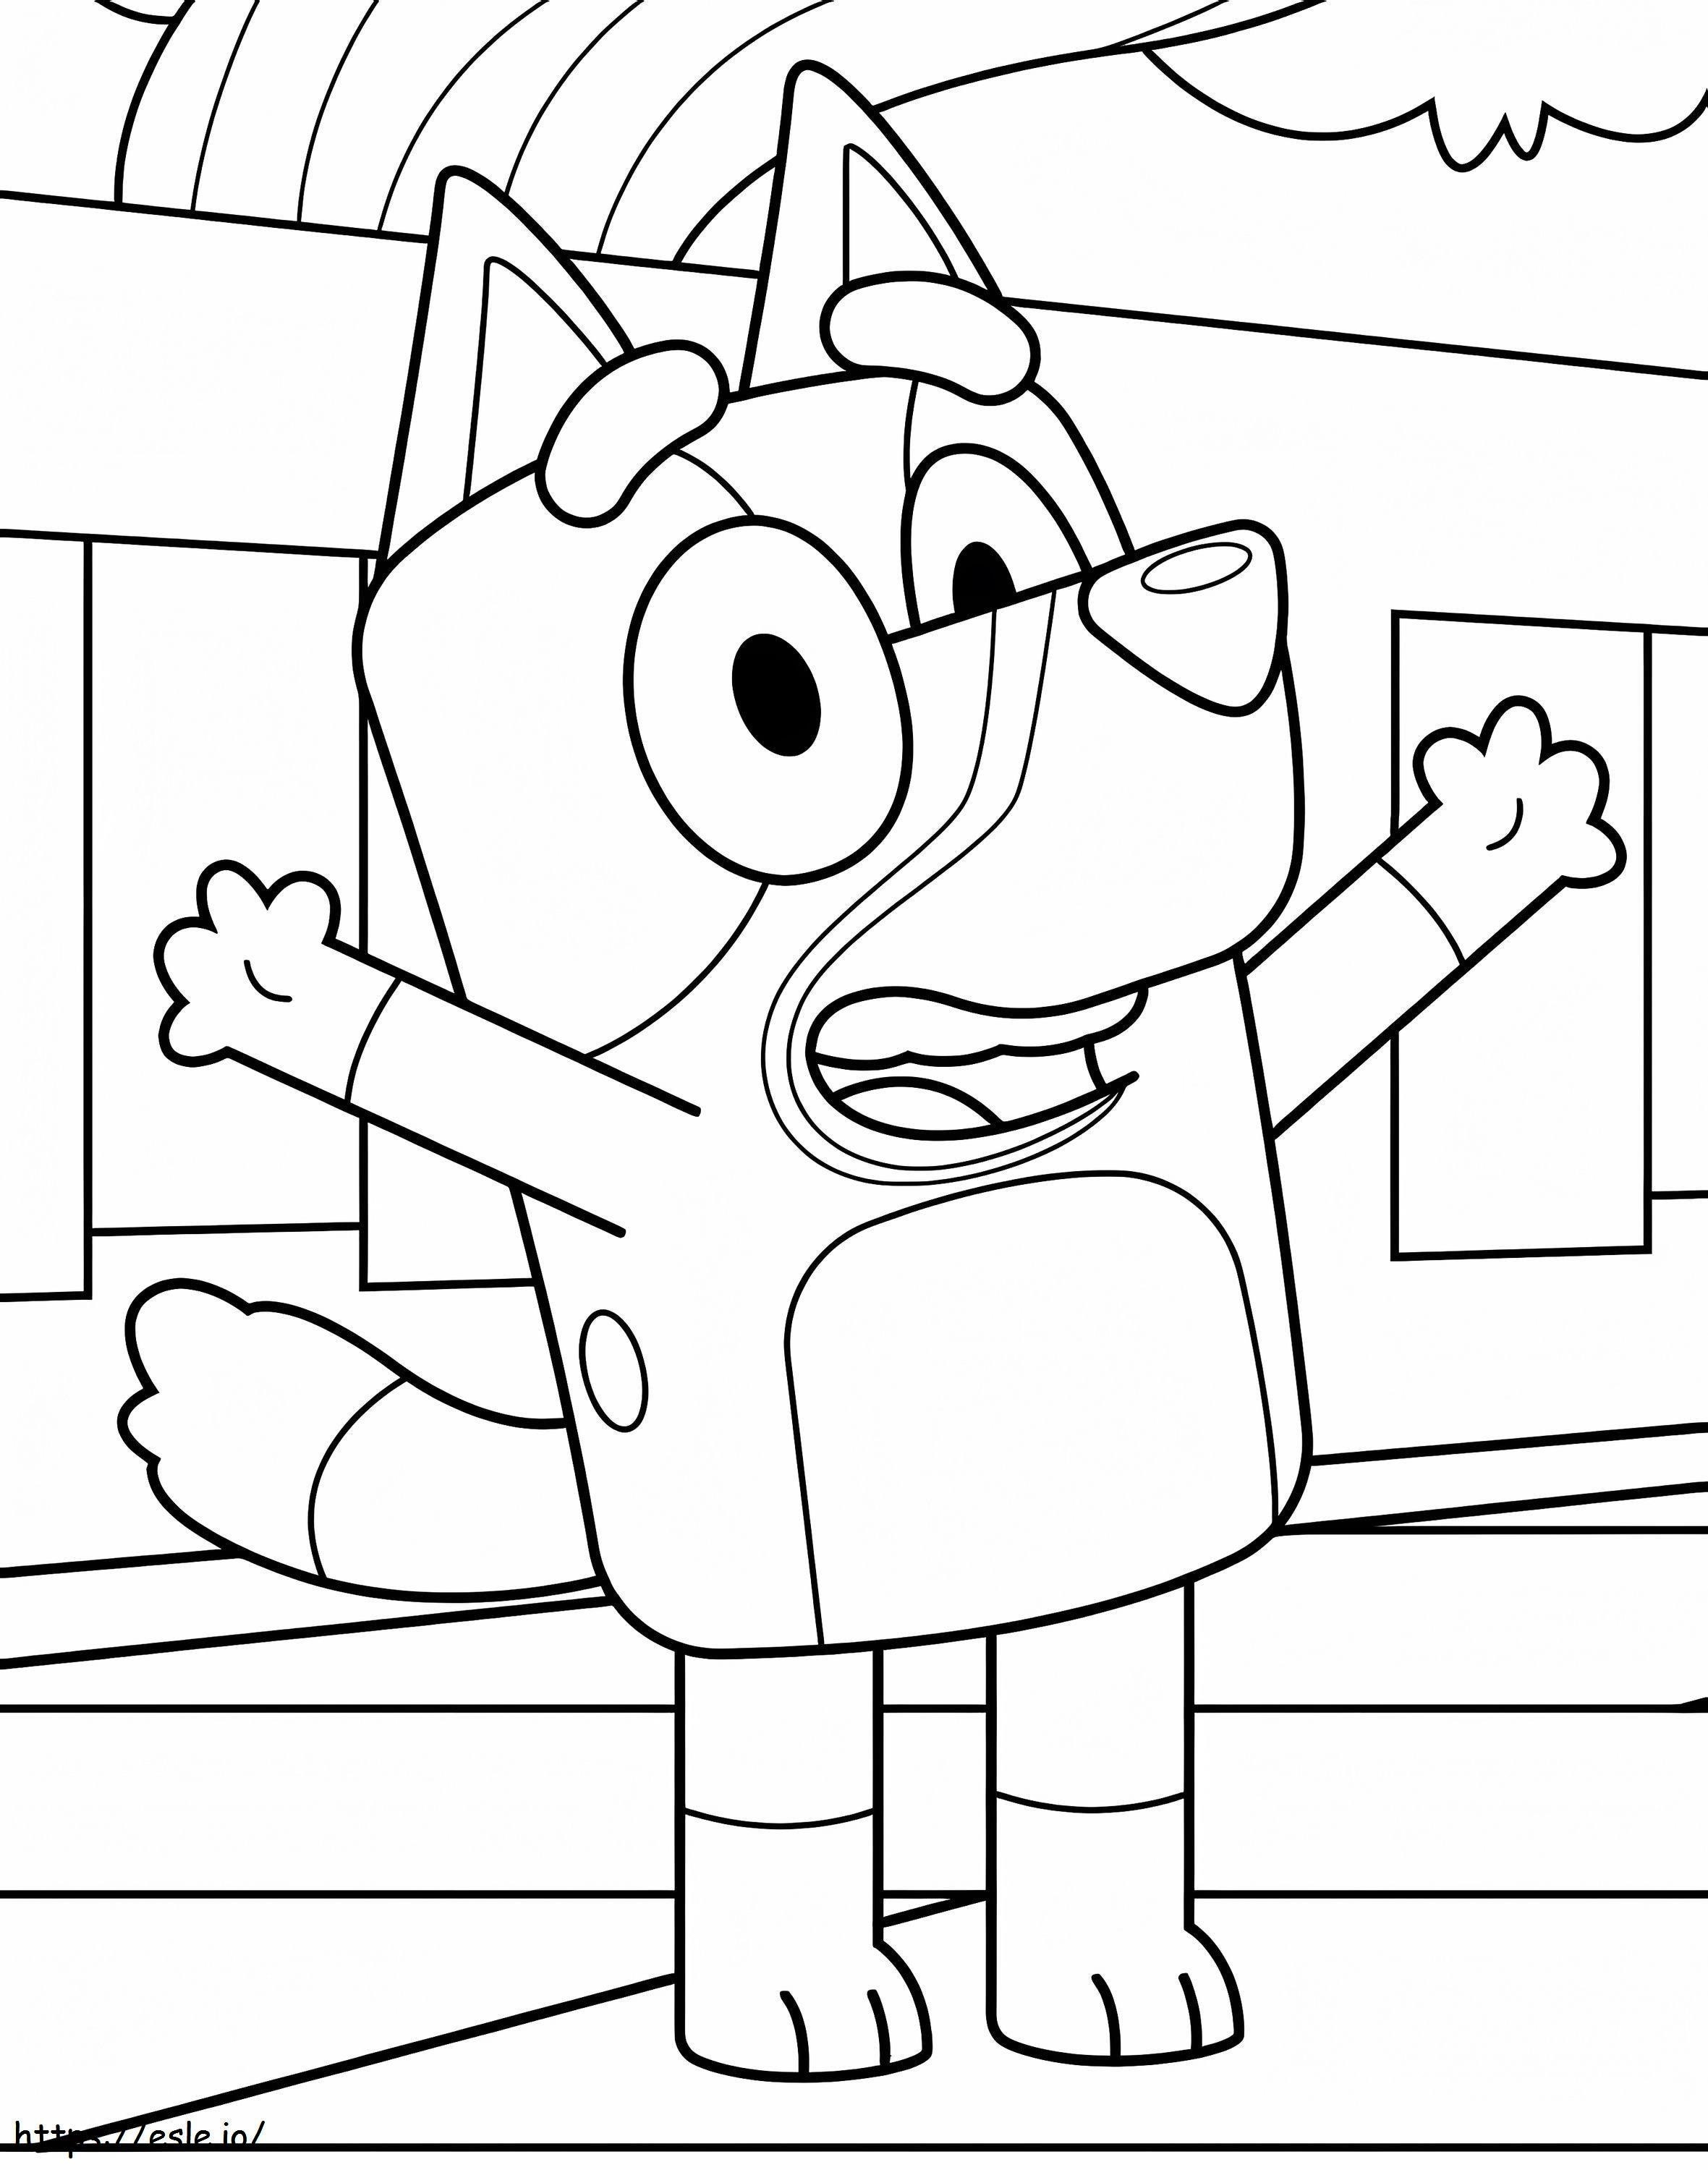 Happy Bluey coloring page